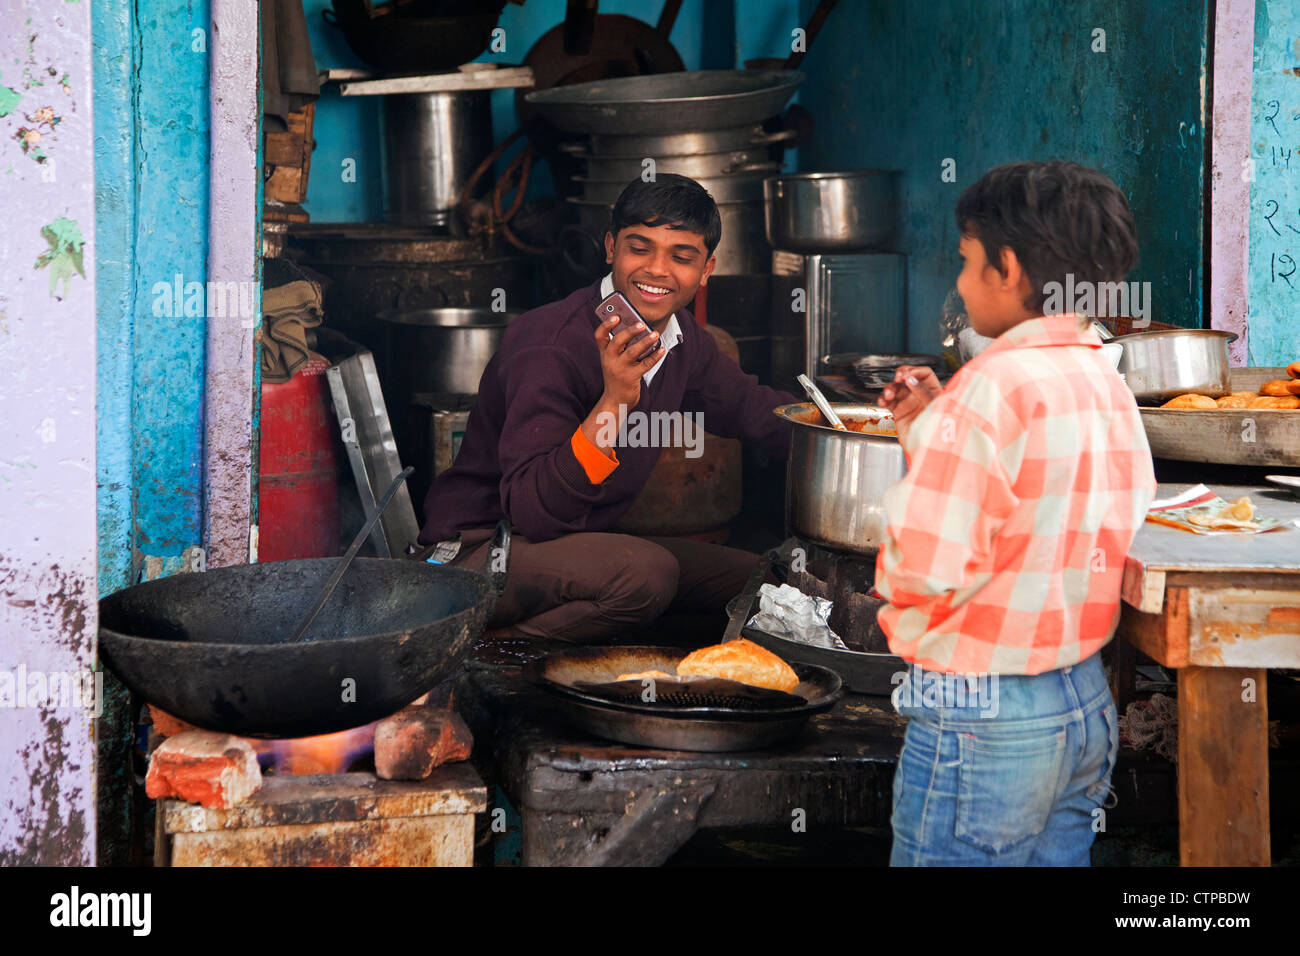 Boy preparing food while making a call with his cellular phone in Old Delhi, India Stock Photo